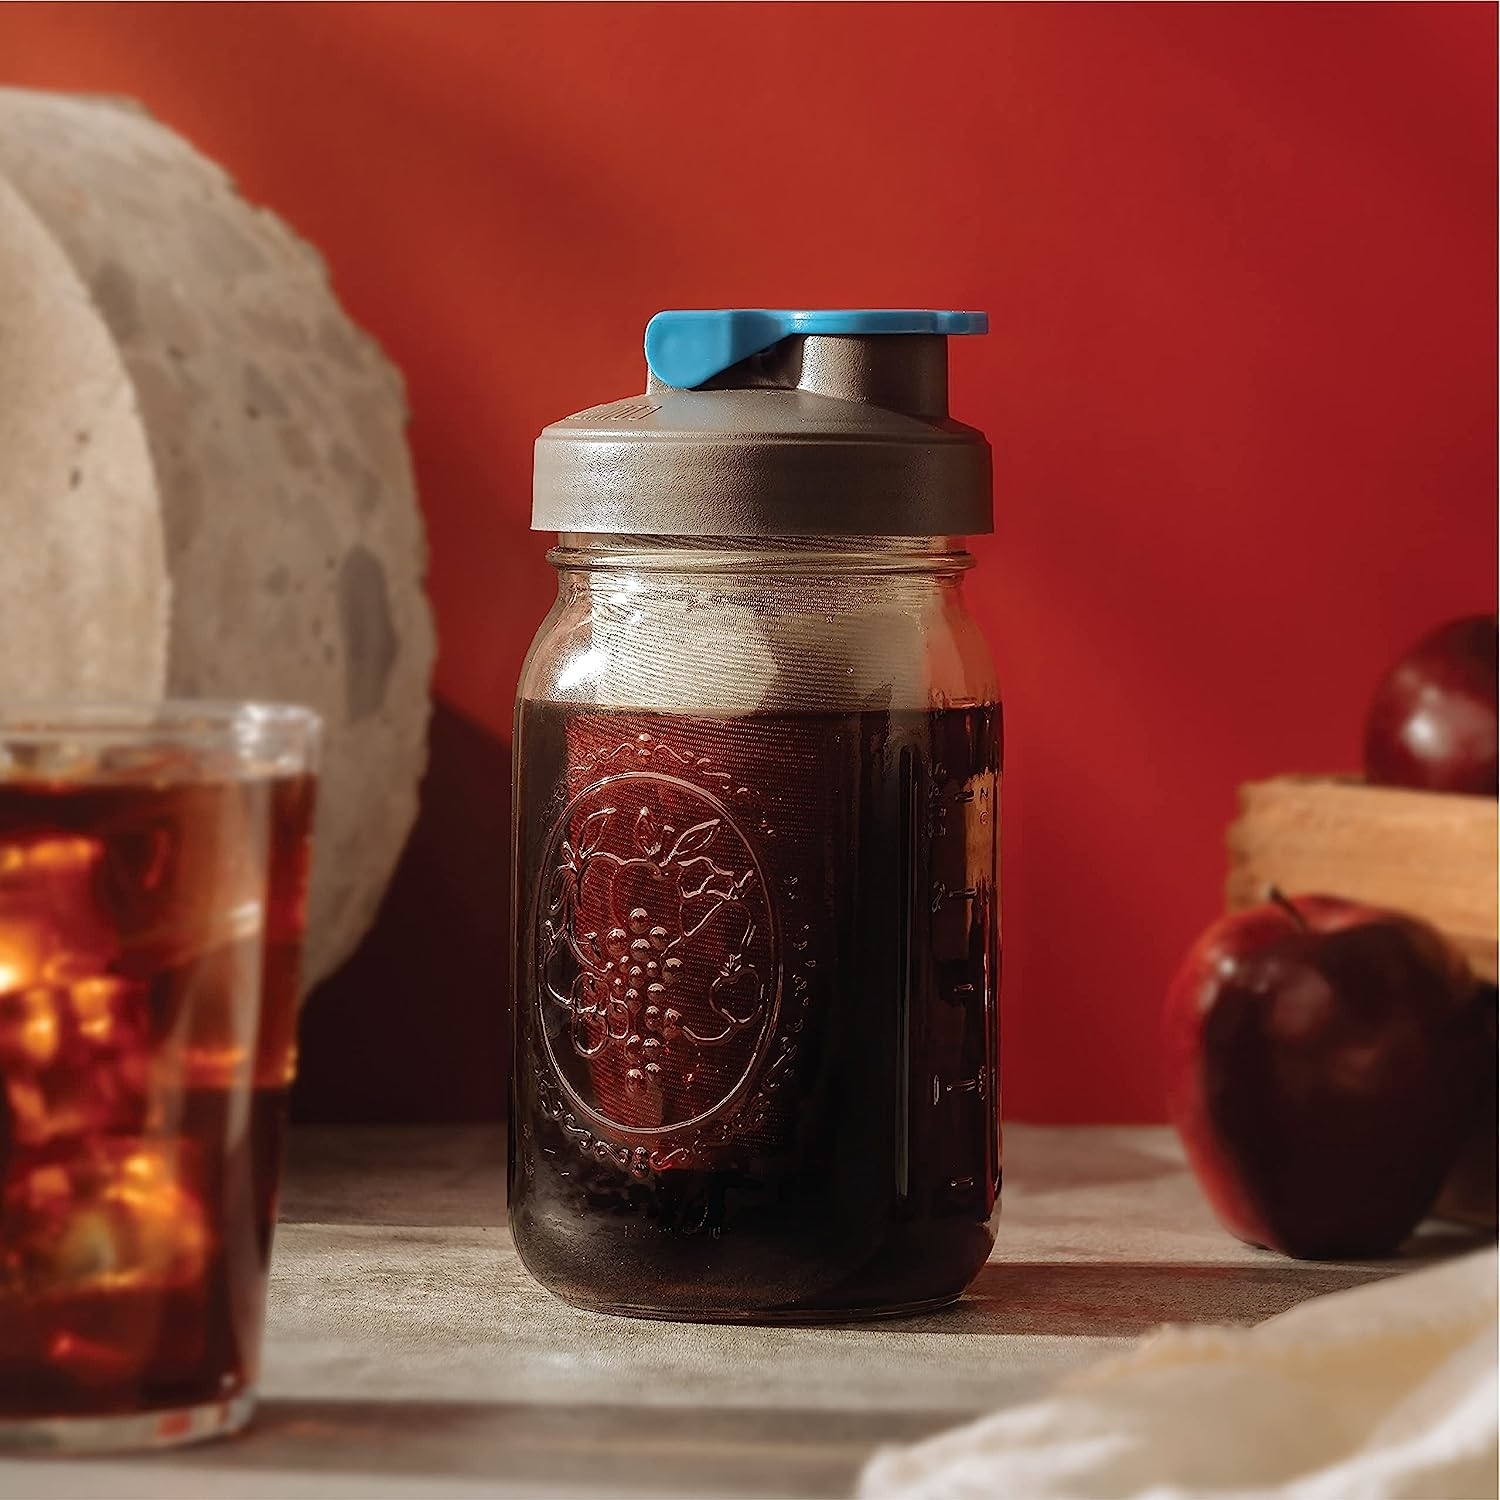 The jar with a pouring cap